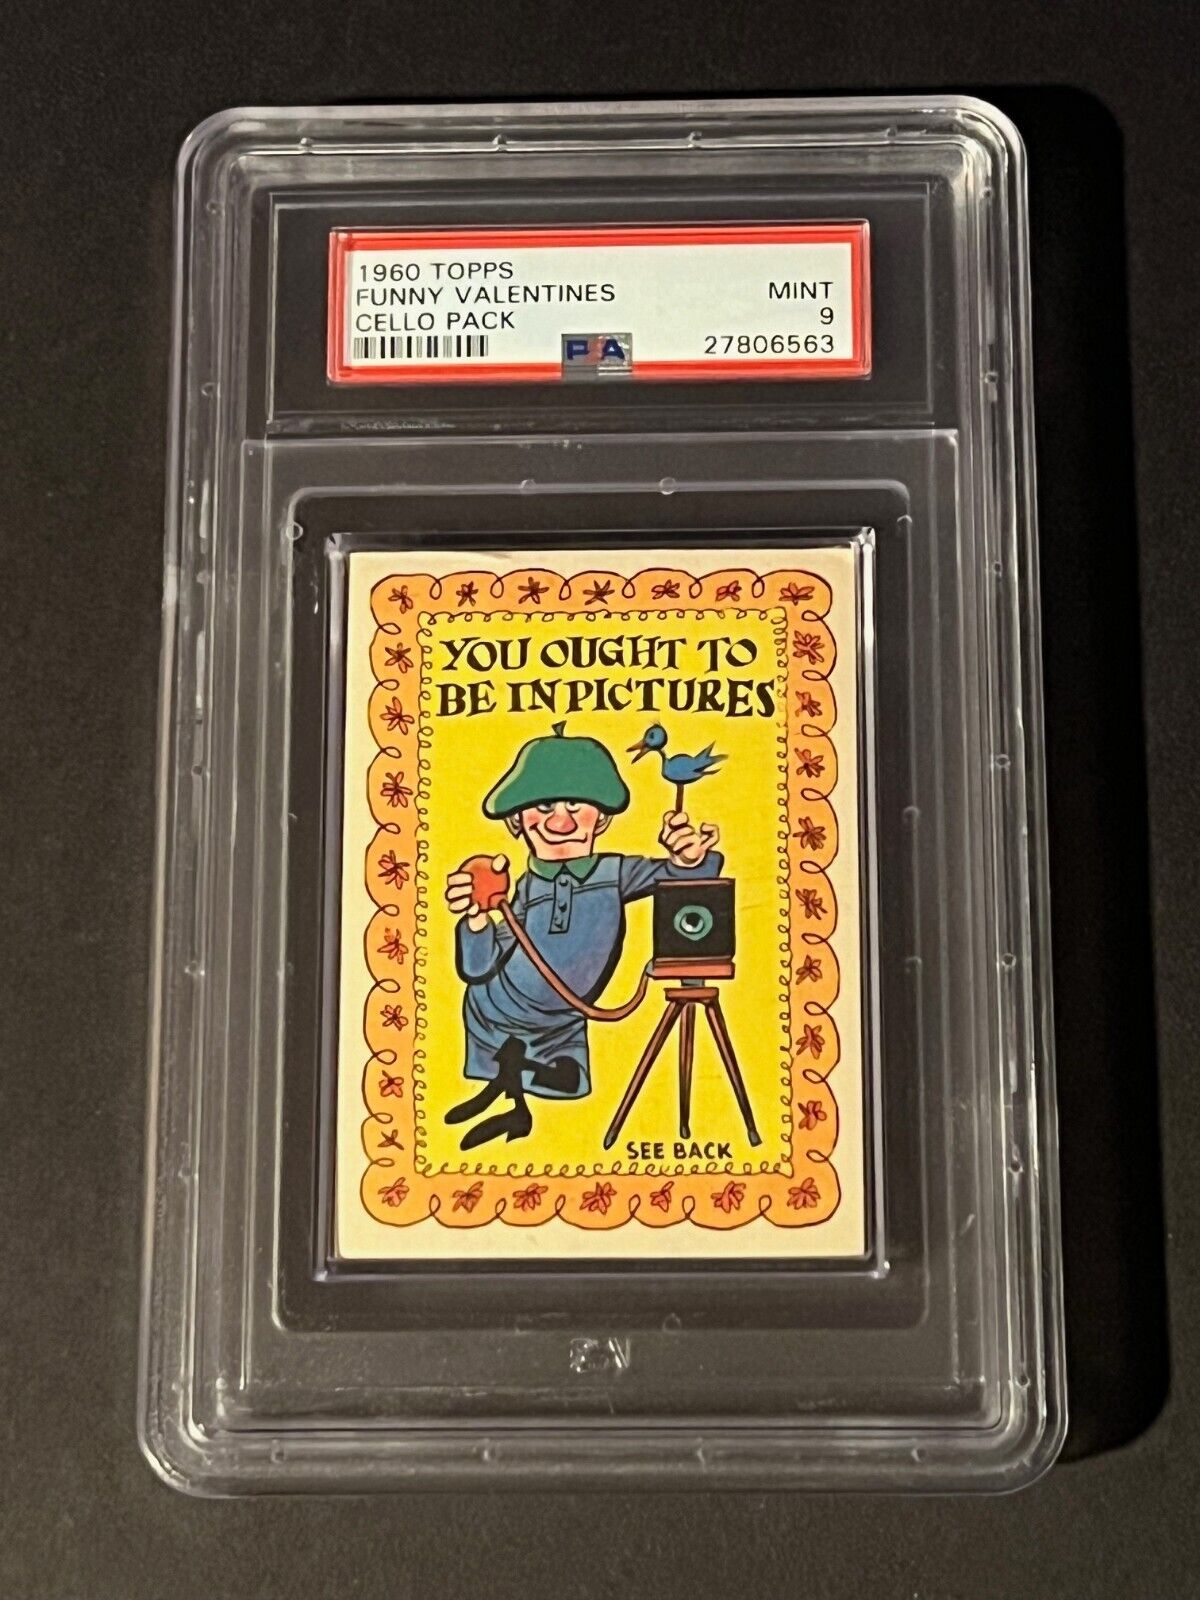 1960 Topps Funny Valentines Unopened Cello Pack PSA MINT 9 MINT